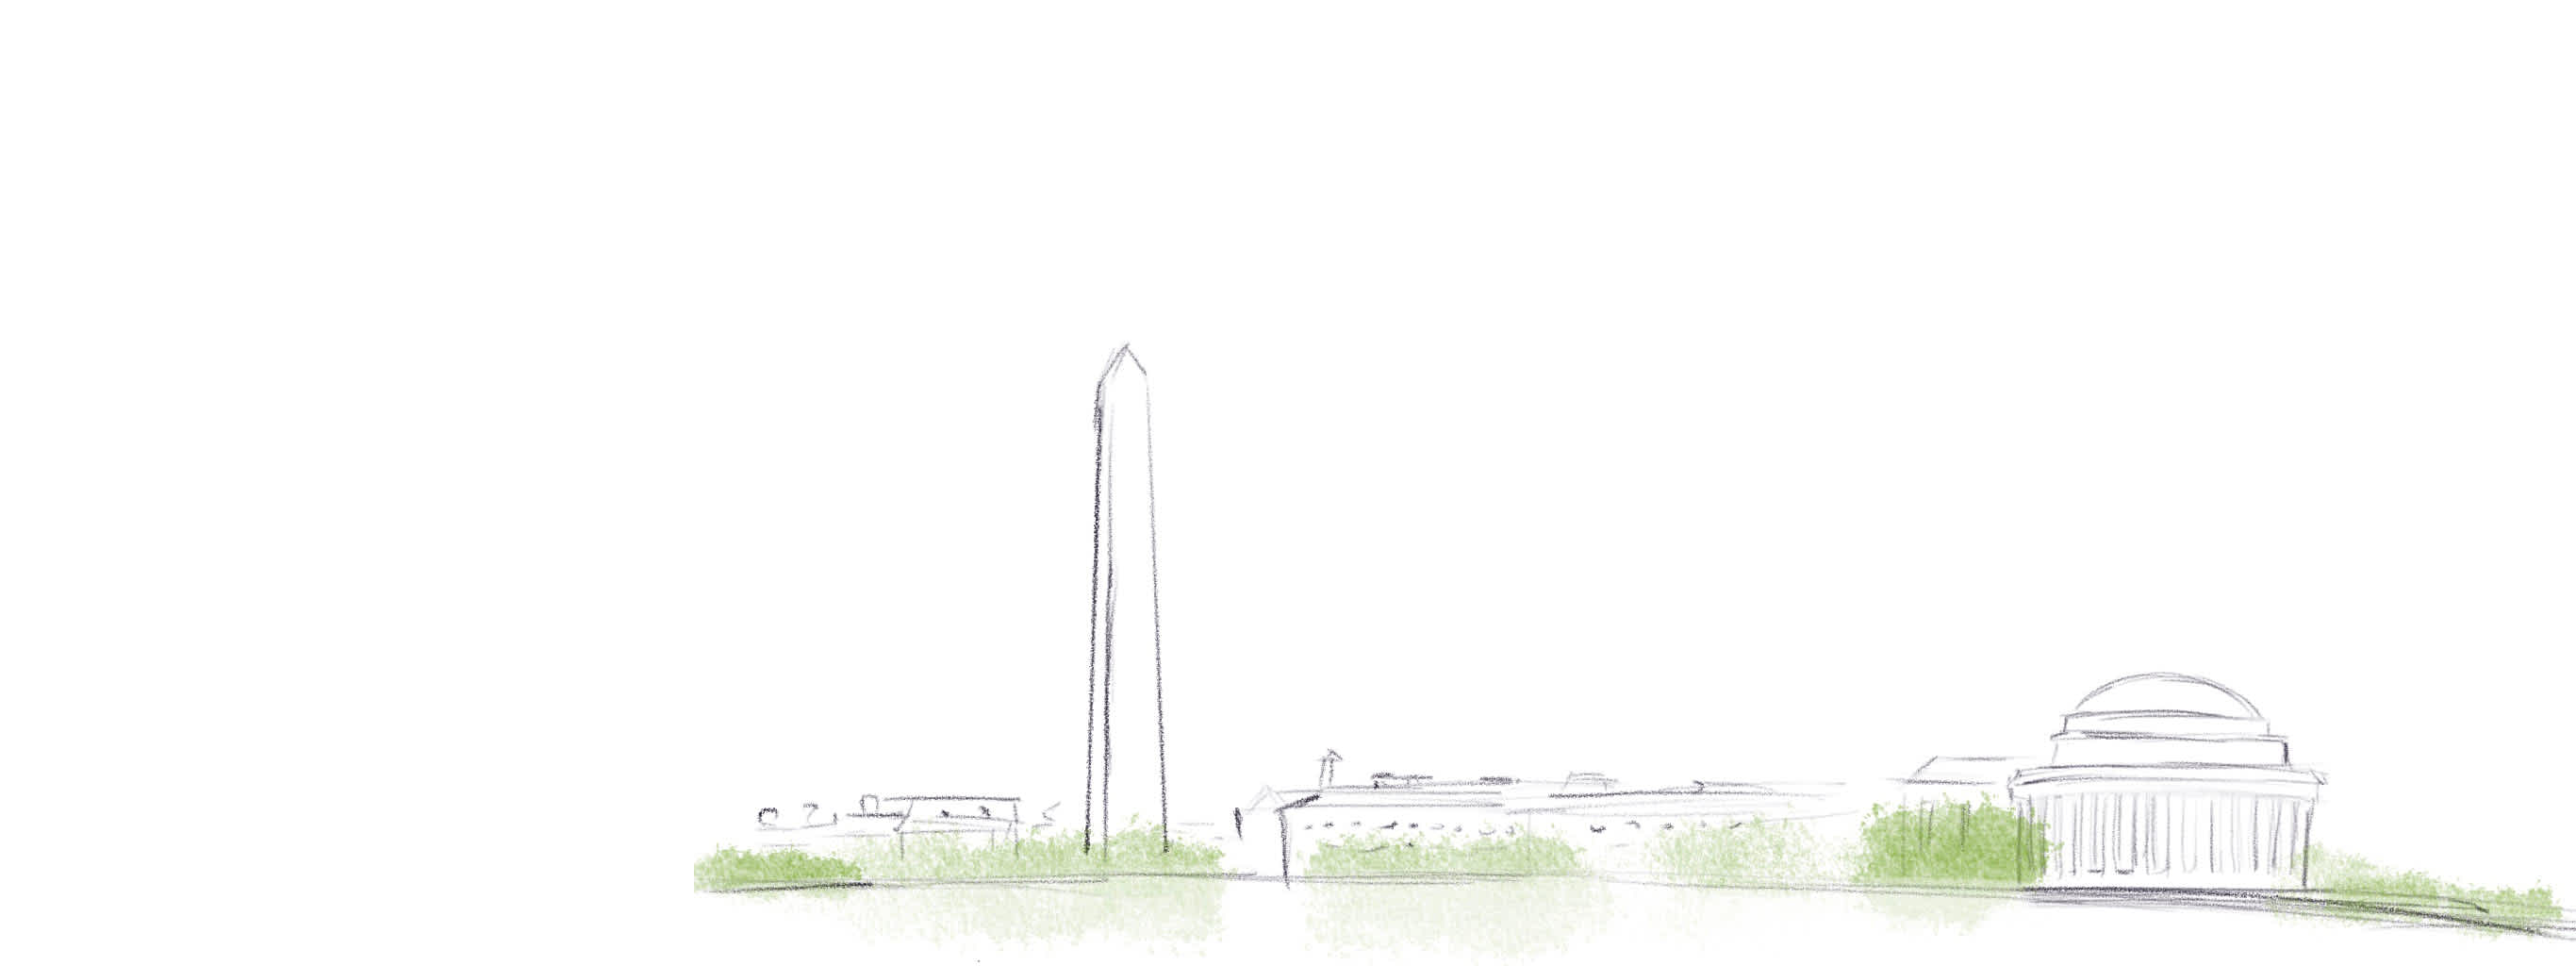 Loose pencil sketch of DC skyline composed of recognizable elements--washington monument, capital, etc